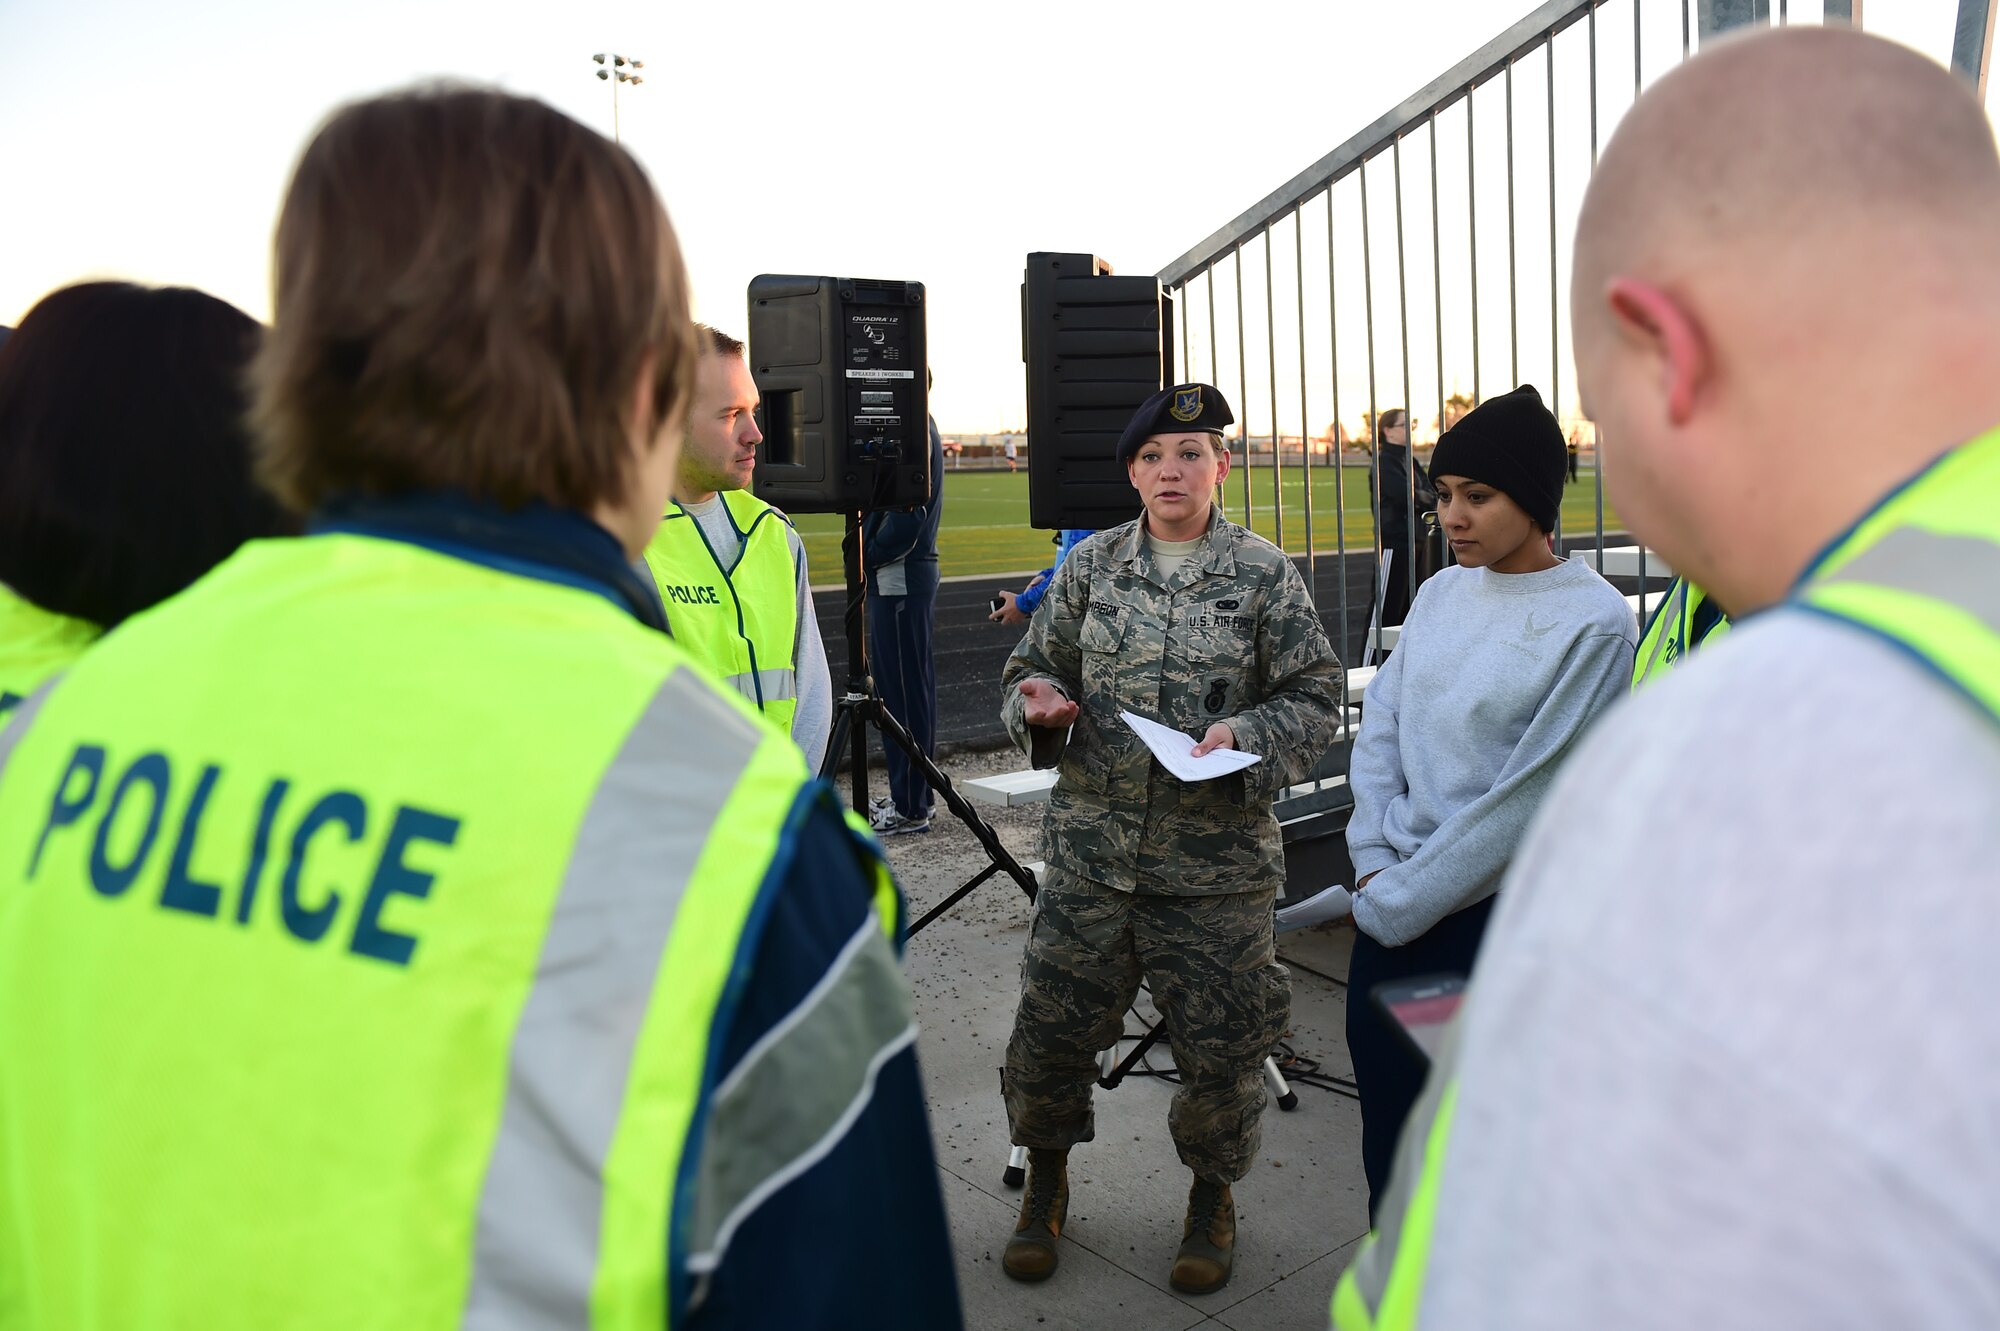 Staff Sgt. Tara Thompson, 460th Security Forces Squadron police services NCO in charge, gives a safety brief to road guards who direct participants during a Domestic Violence Awareness Month 5K Run/Walk Oct. 5, 2016, at the outdoor track on Buckley Air Force Base, Colo. Members of the 460th Medical Group Family Advocacy Program sponsored the event to address the problem of domestic violence in hopes of decreasing the number of people affected. (U.S. Air Force photo by Airman 1st Class Gabrielle Spradling/Released)